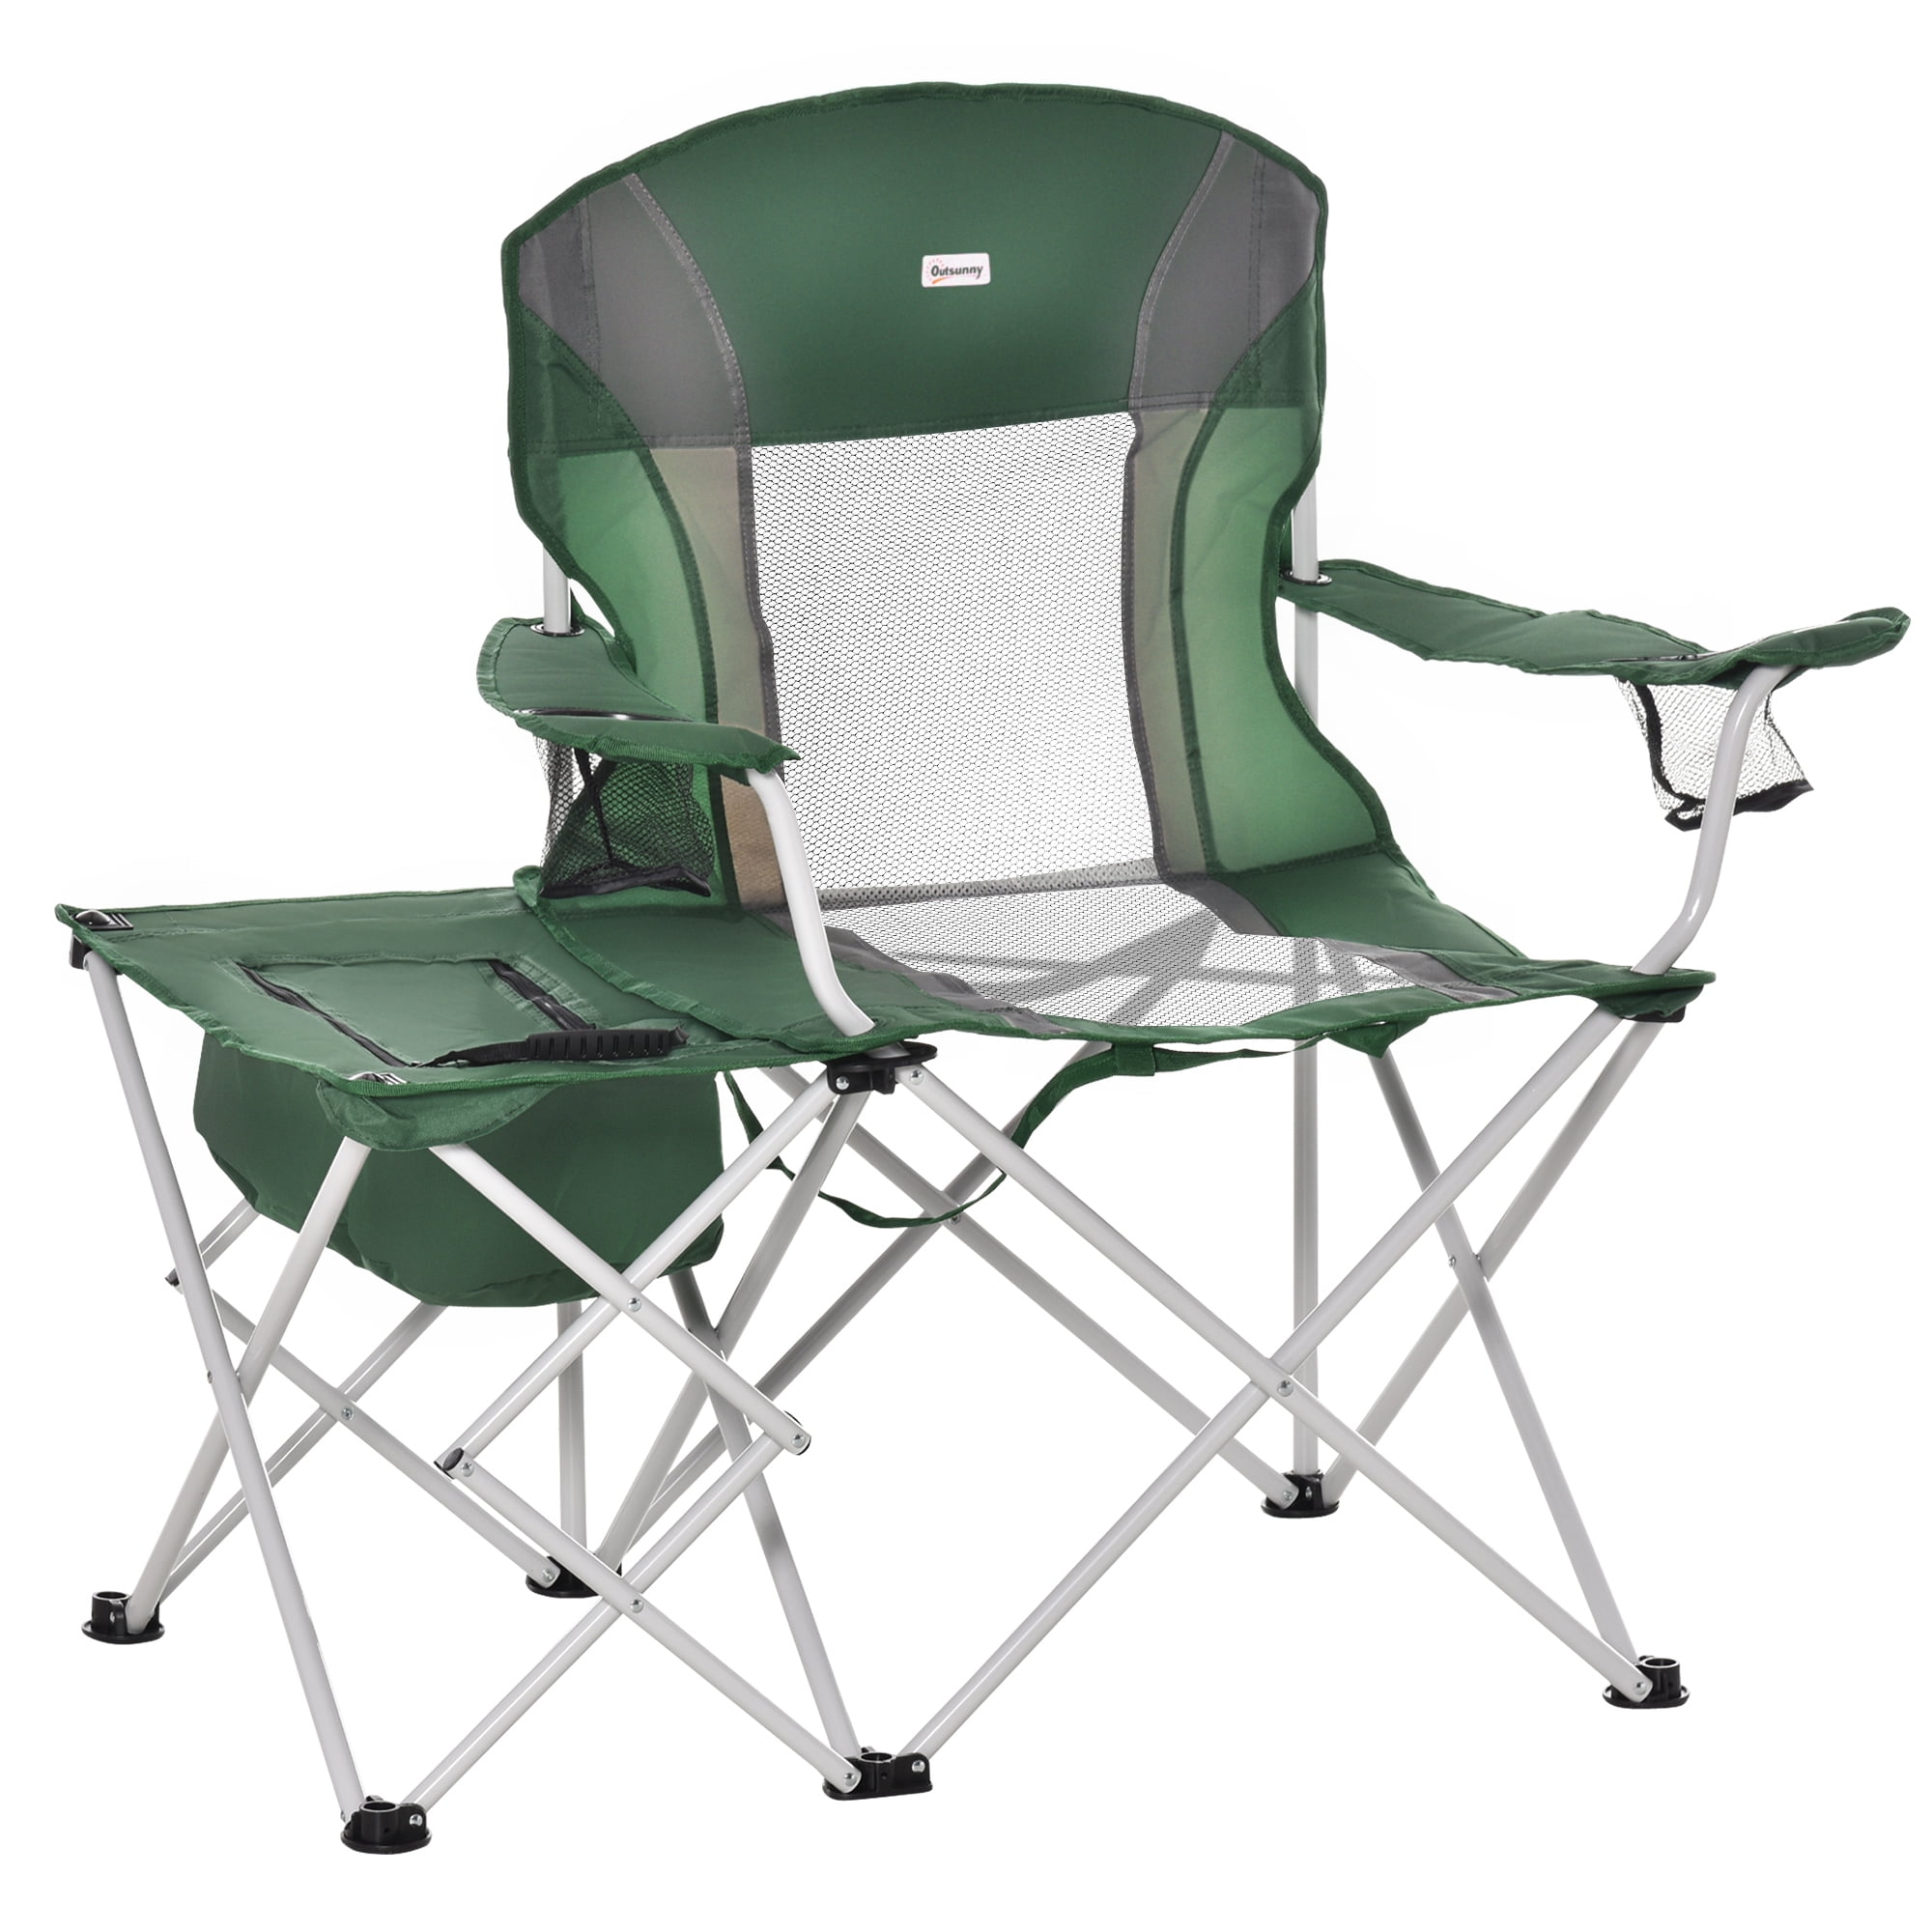 Foldable Camping Chair Folding Fishing Outdoor with Armrest